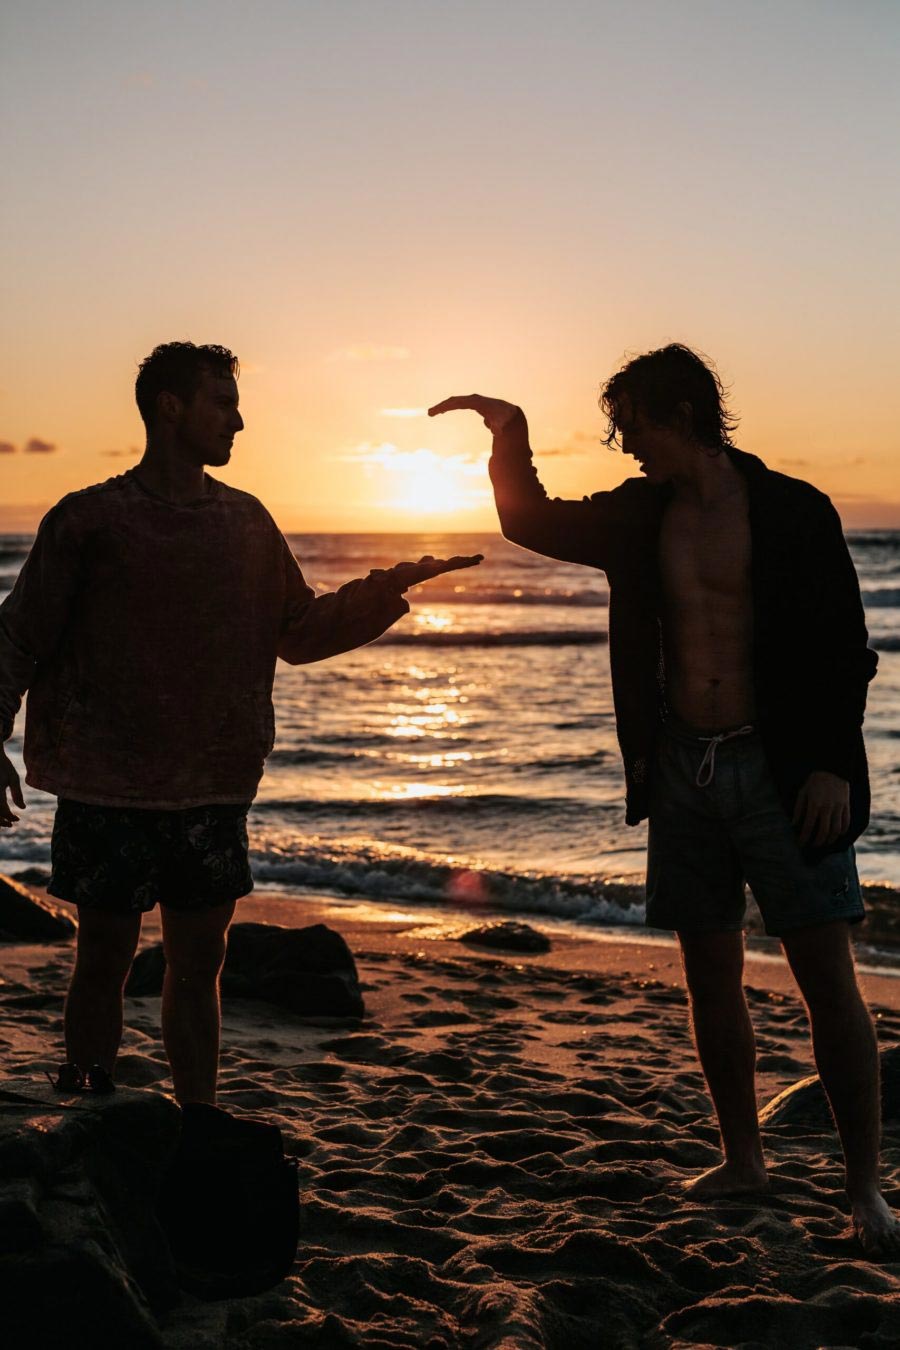 photo of close-up photo of two men shaking hands near beach at sunset